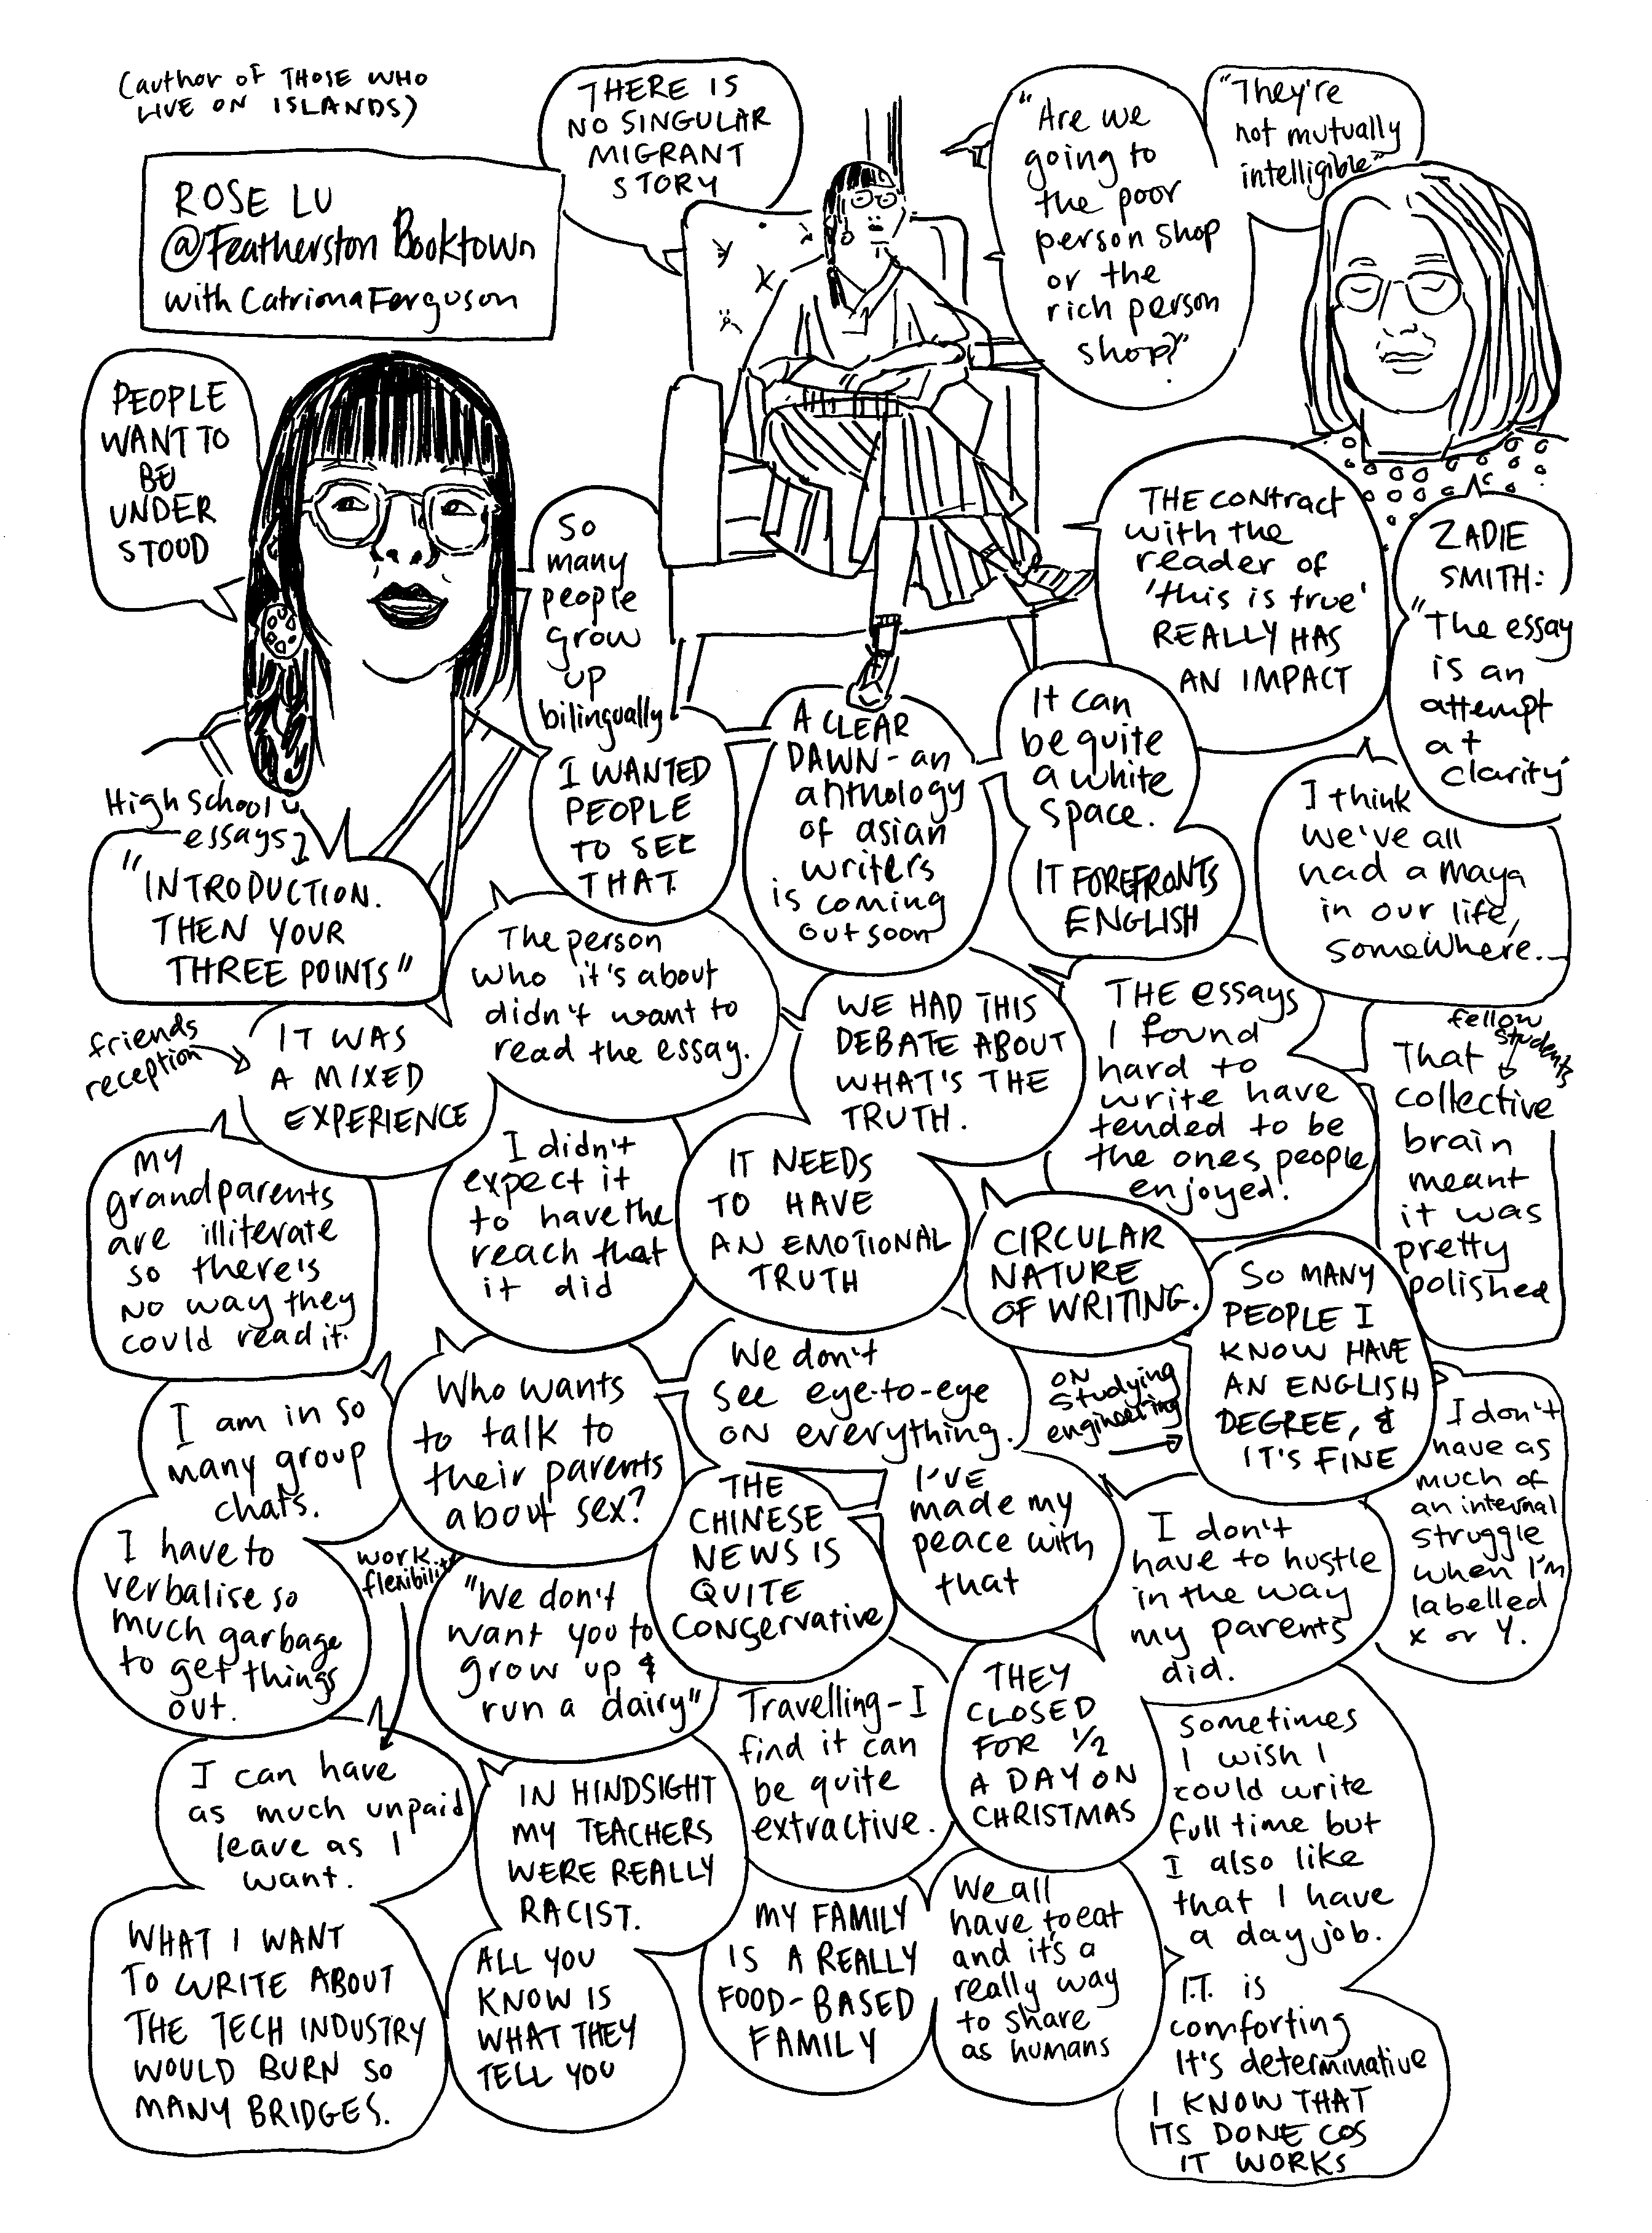 Comic-style drawing documenting an event with portraits of the speakers and speech bubbles with quotes.